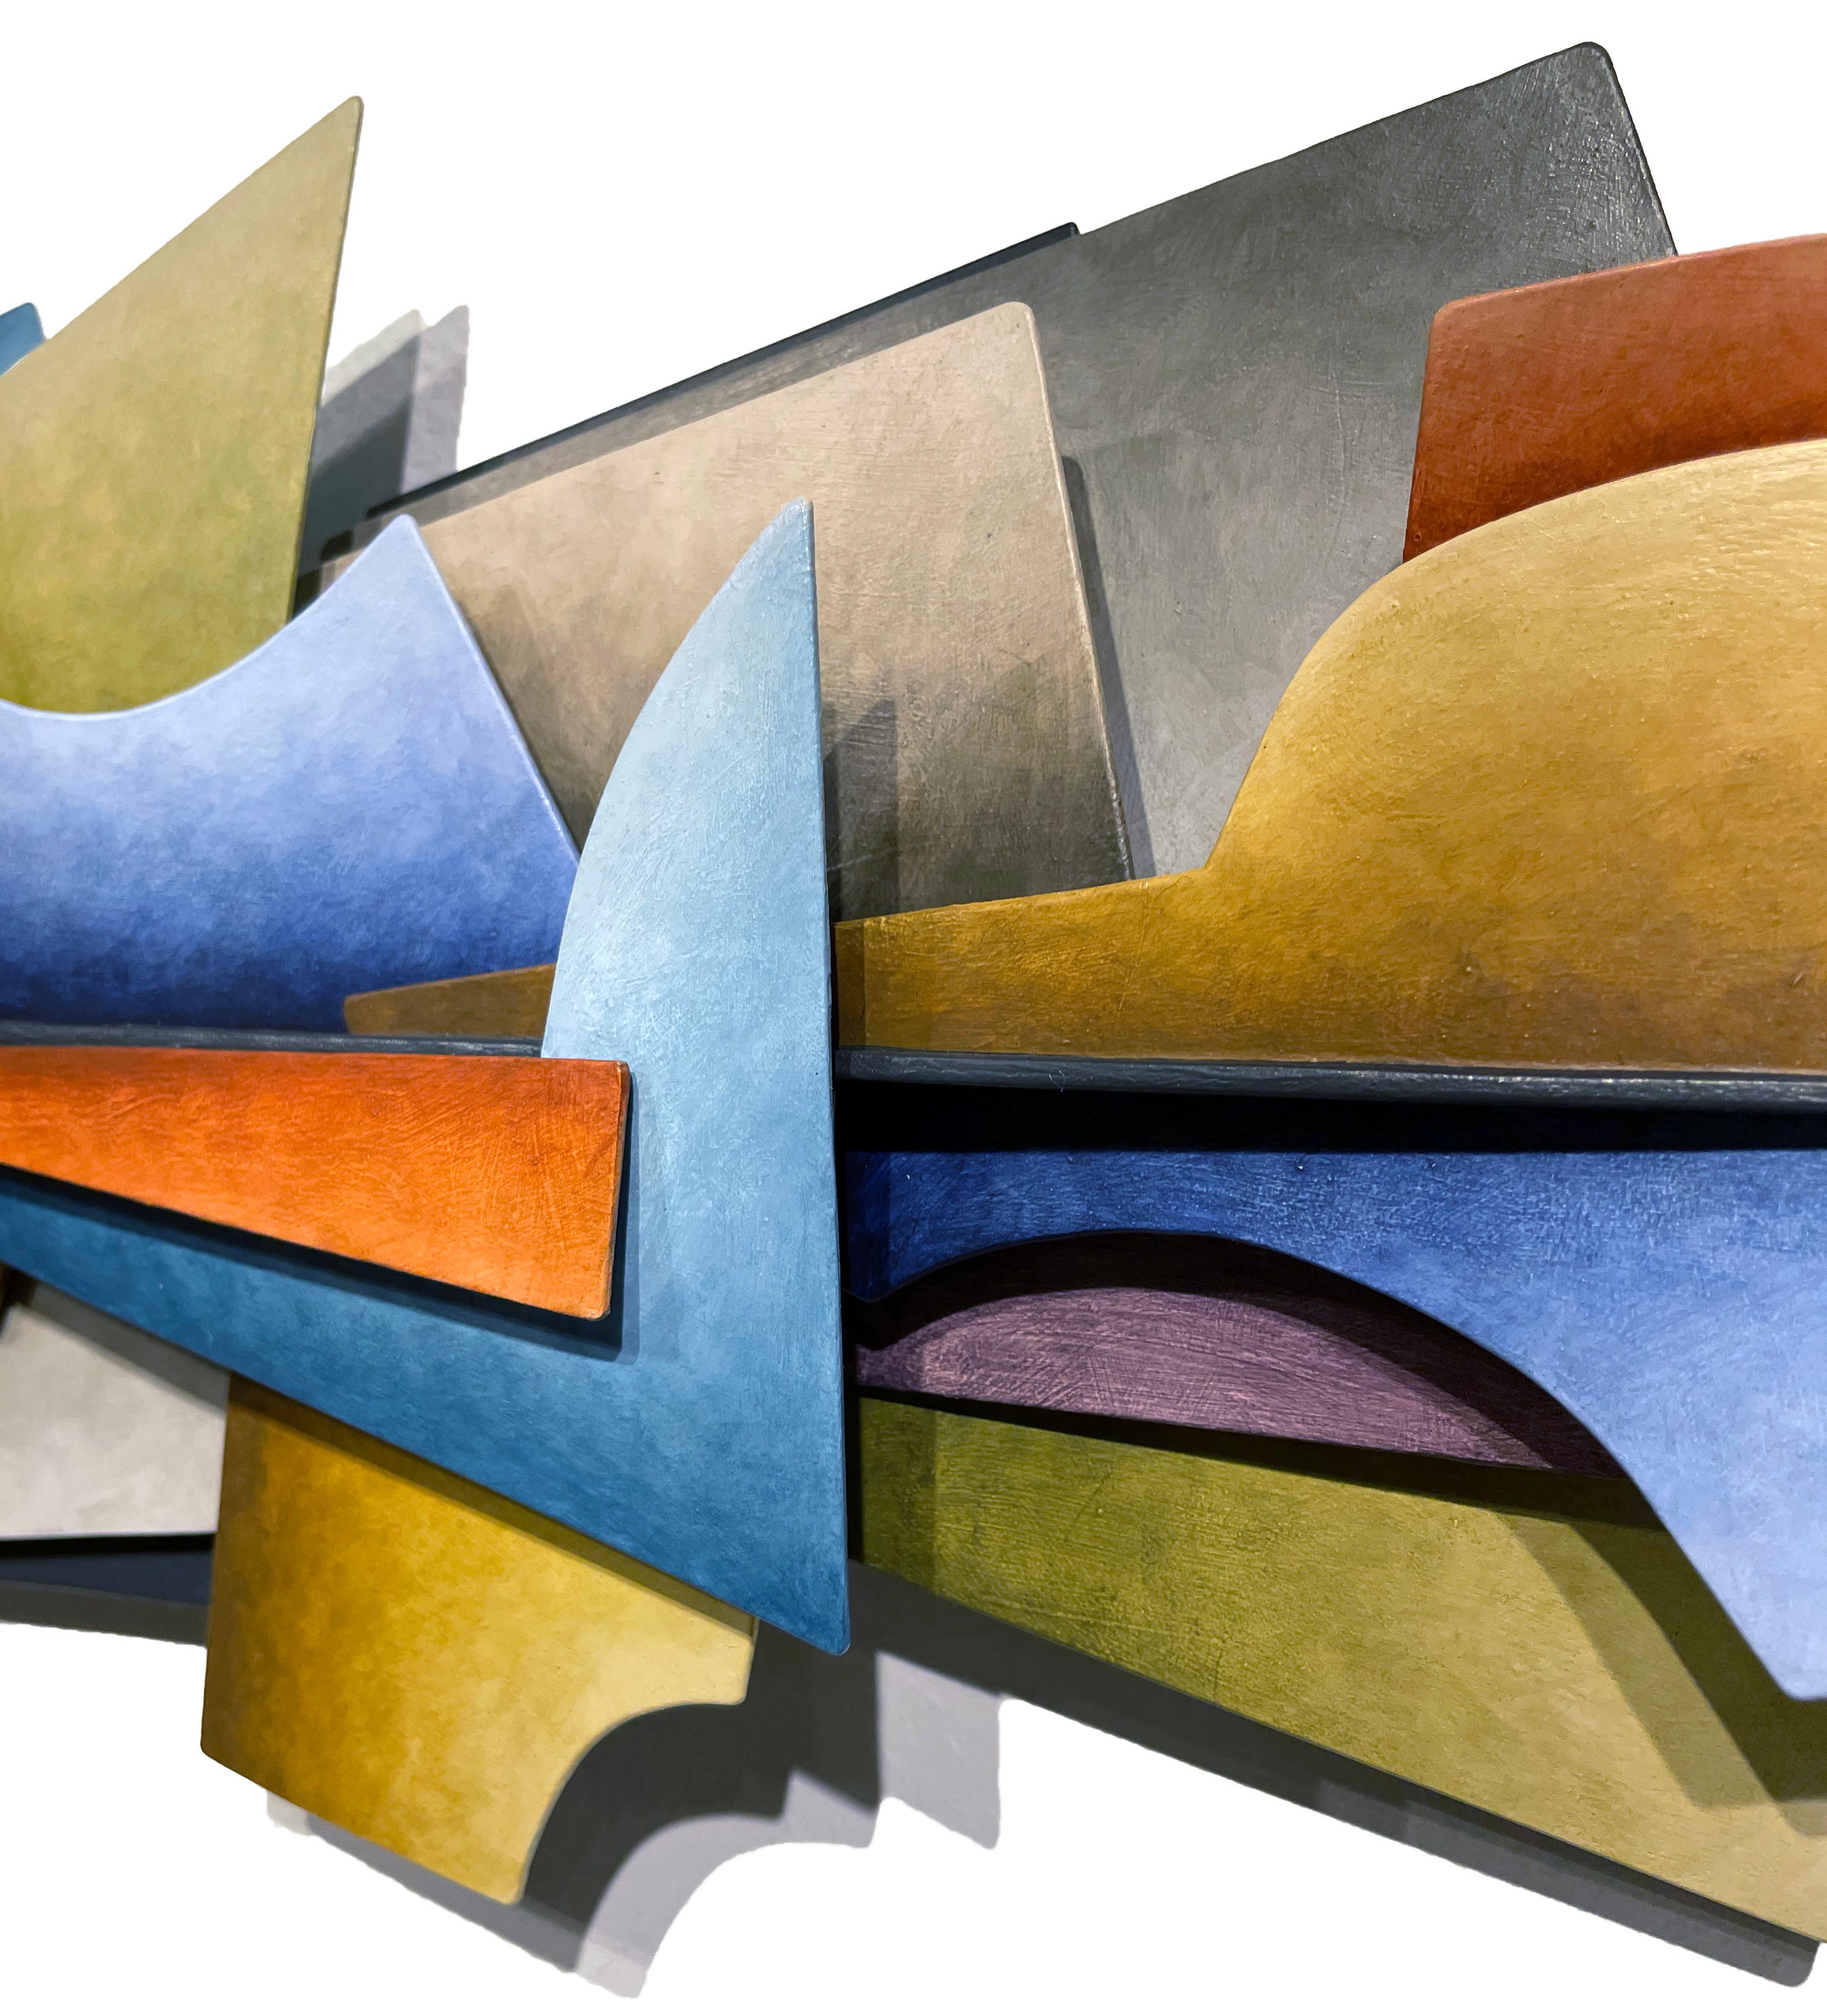 Woven Plane - Abstract Geometric Form, Hand Painted Welded Steel Wall Sculpture  For Sale 3